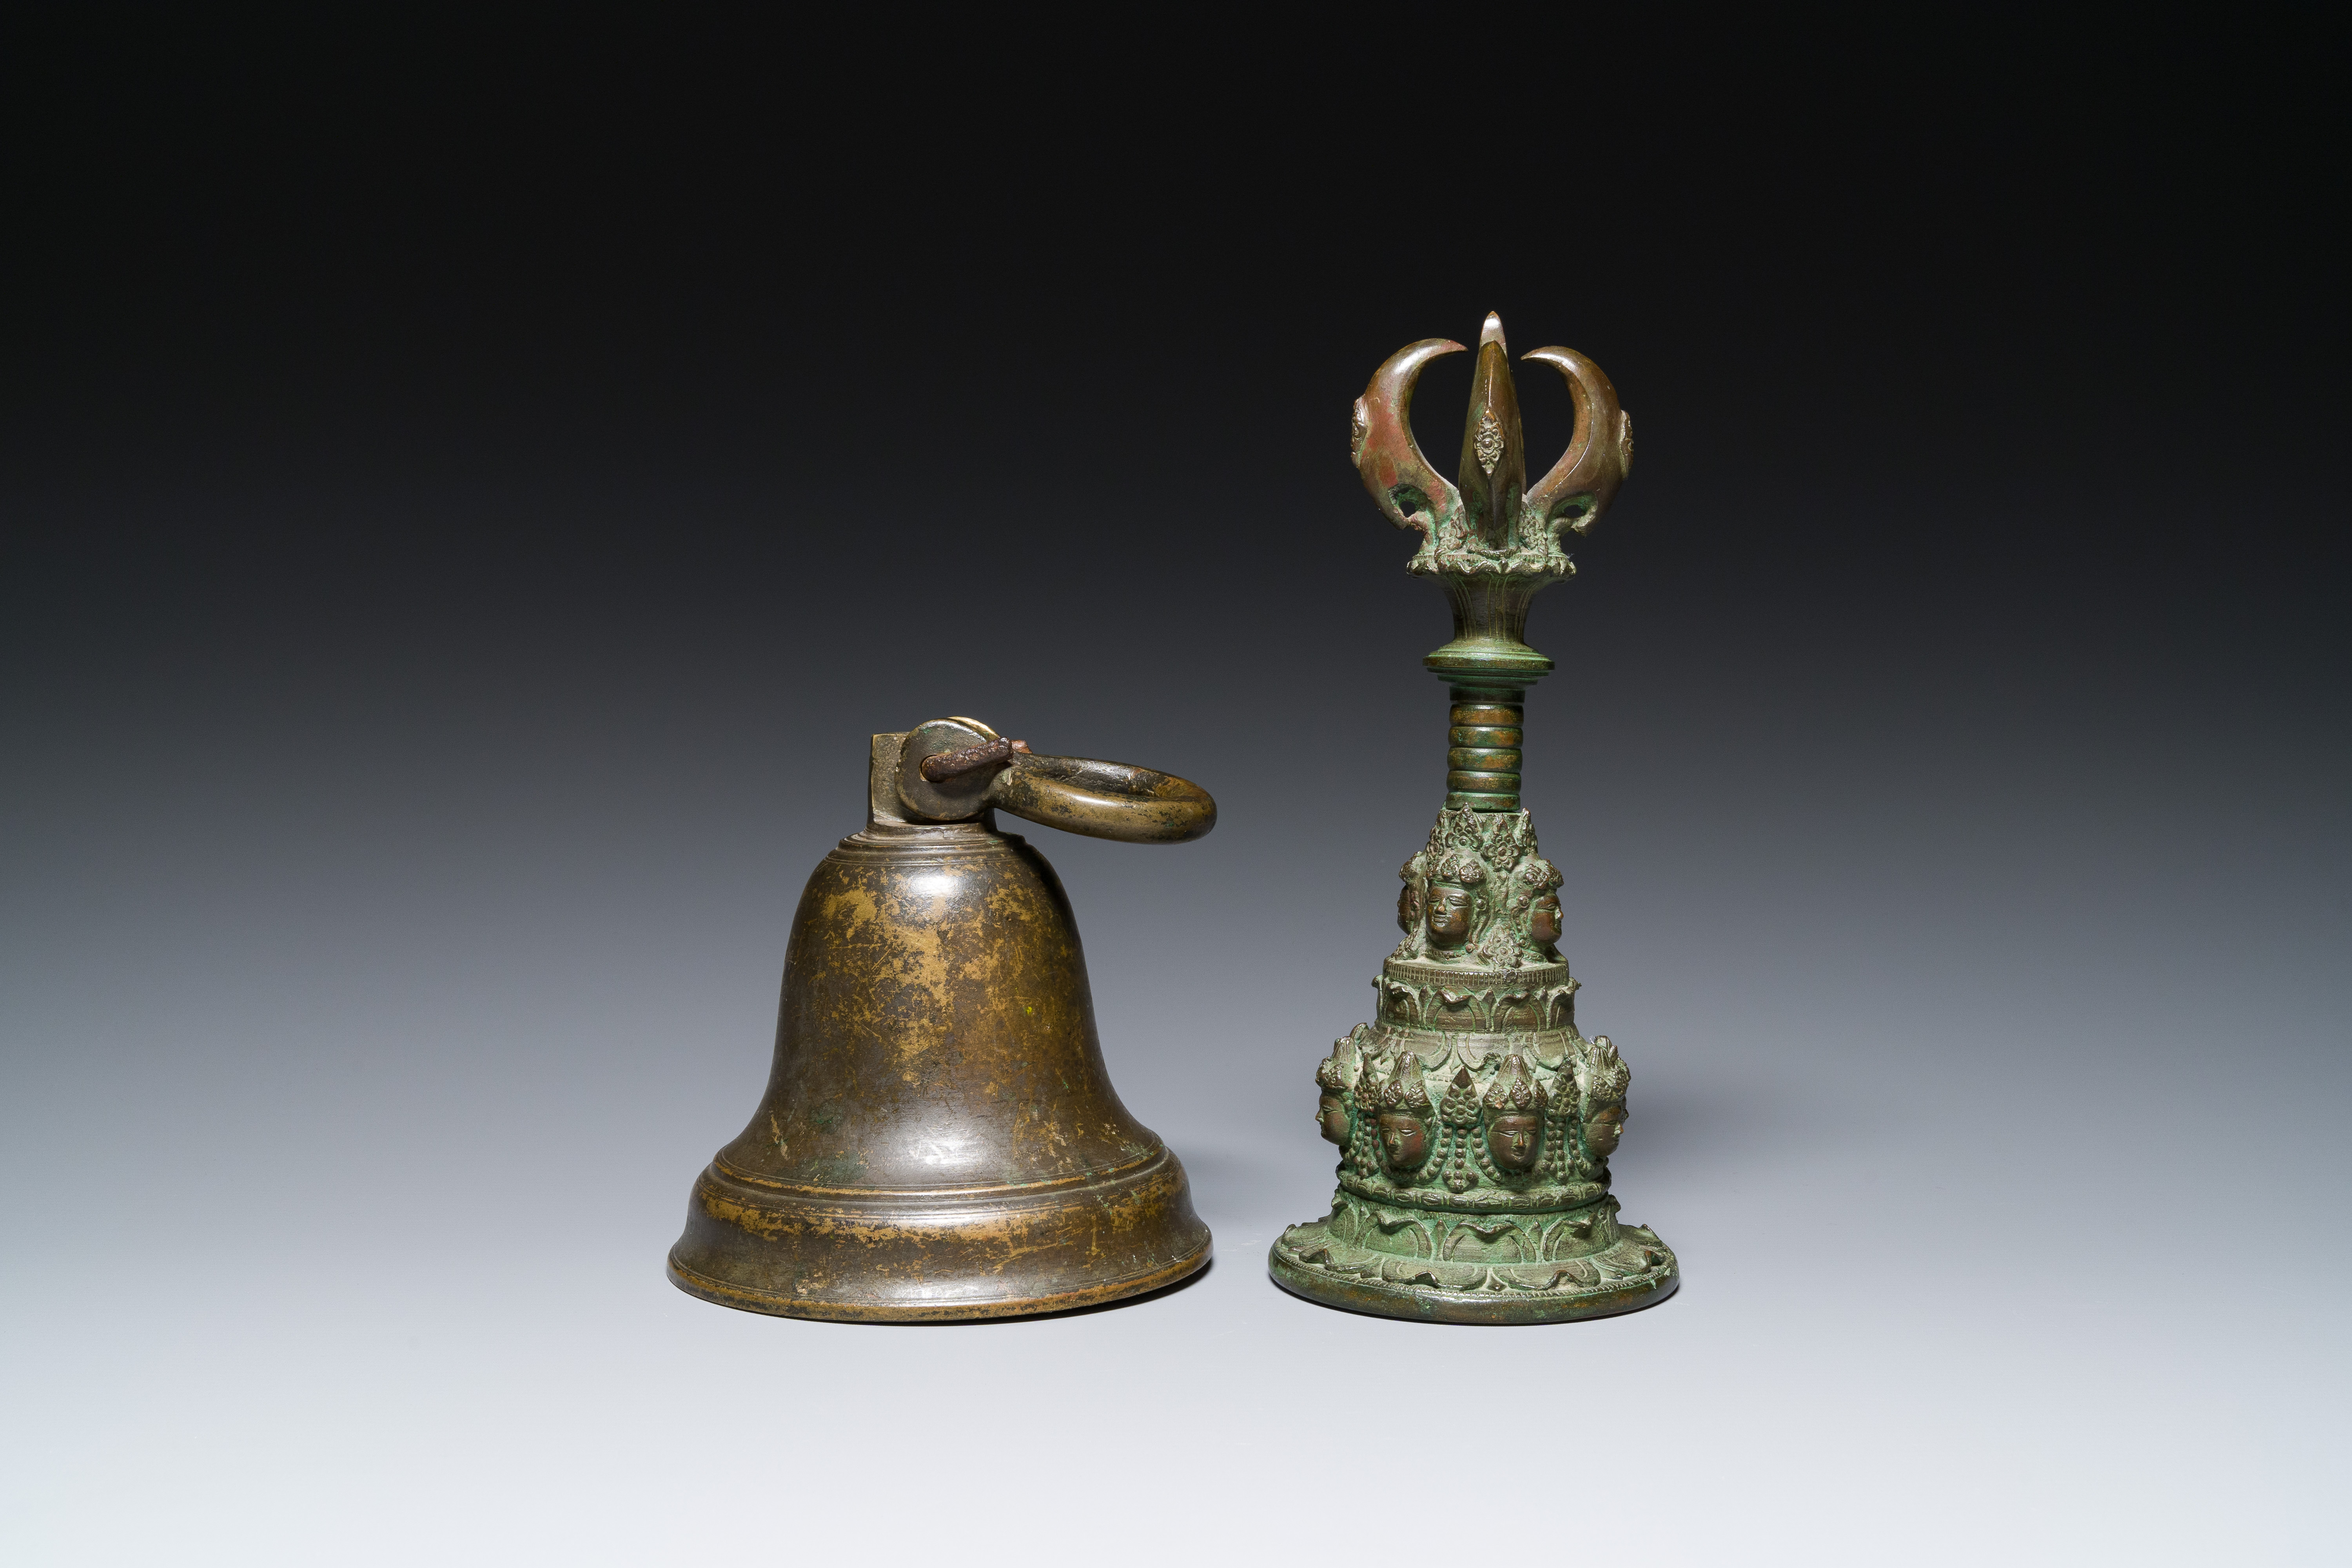 A bronze bell and a ceremonial hand bell, South Asia and Southeast Asia, 19th C. or earlier - Image 15 of 21